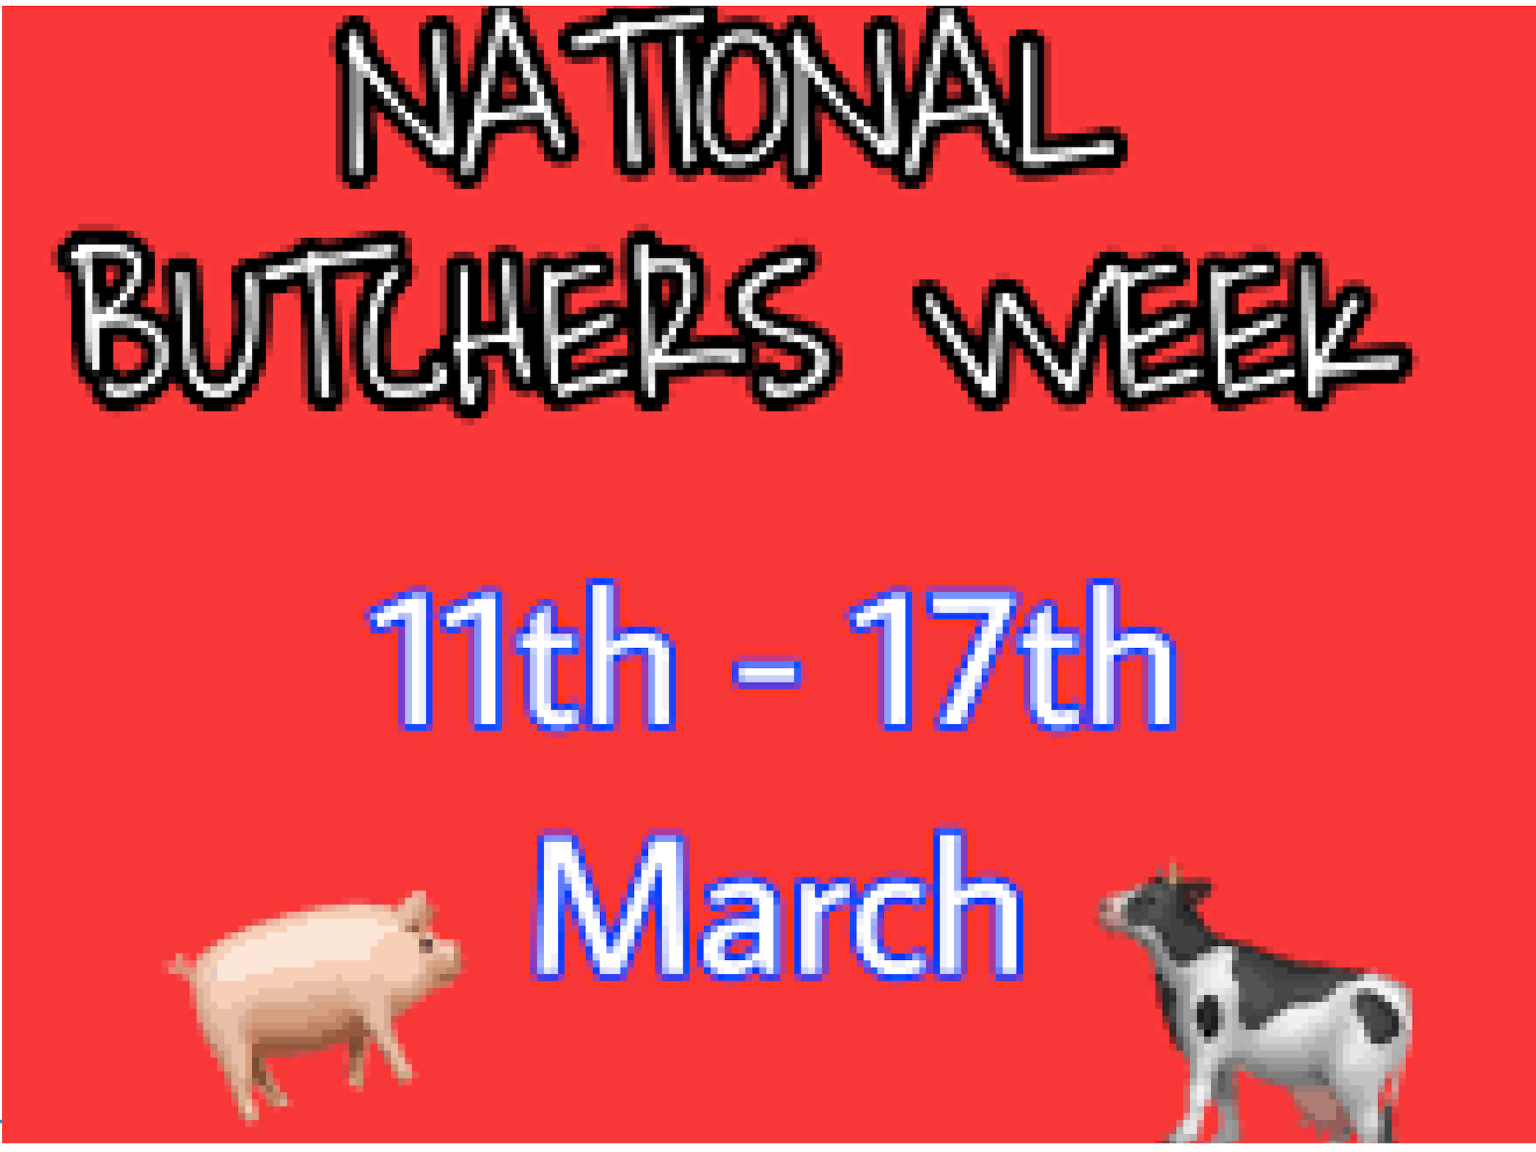 National Butchers Week begins on Monday 11th March and continues to the